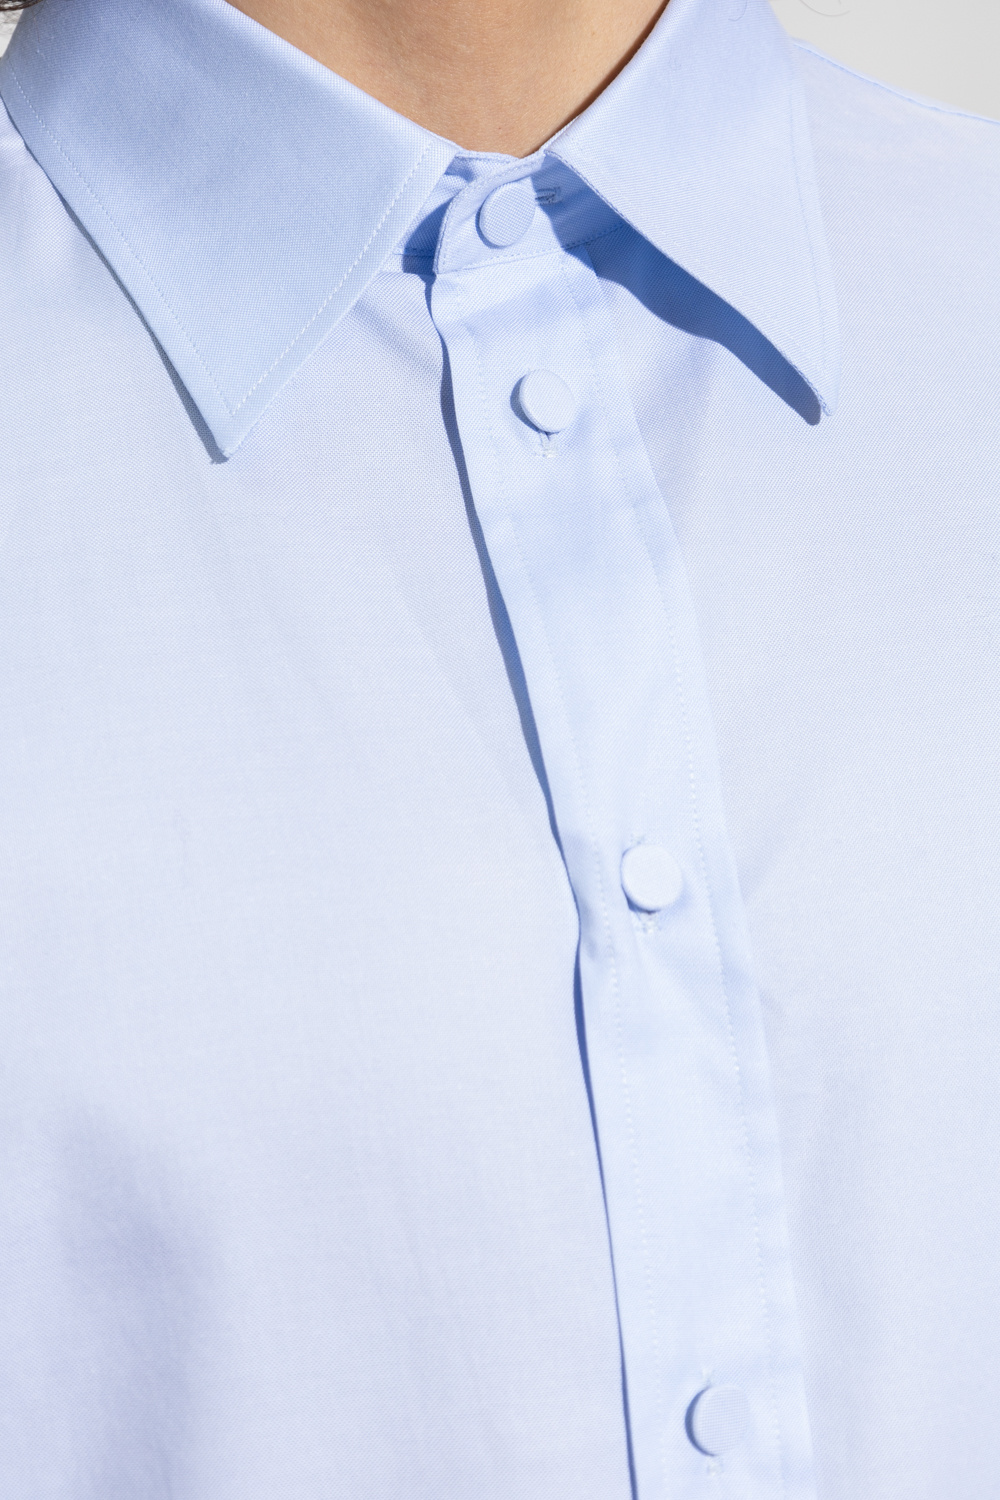 Gucci Cotton shirt with tie neck